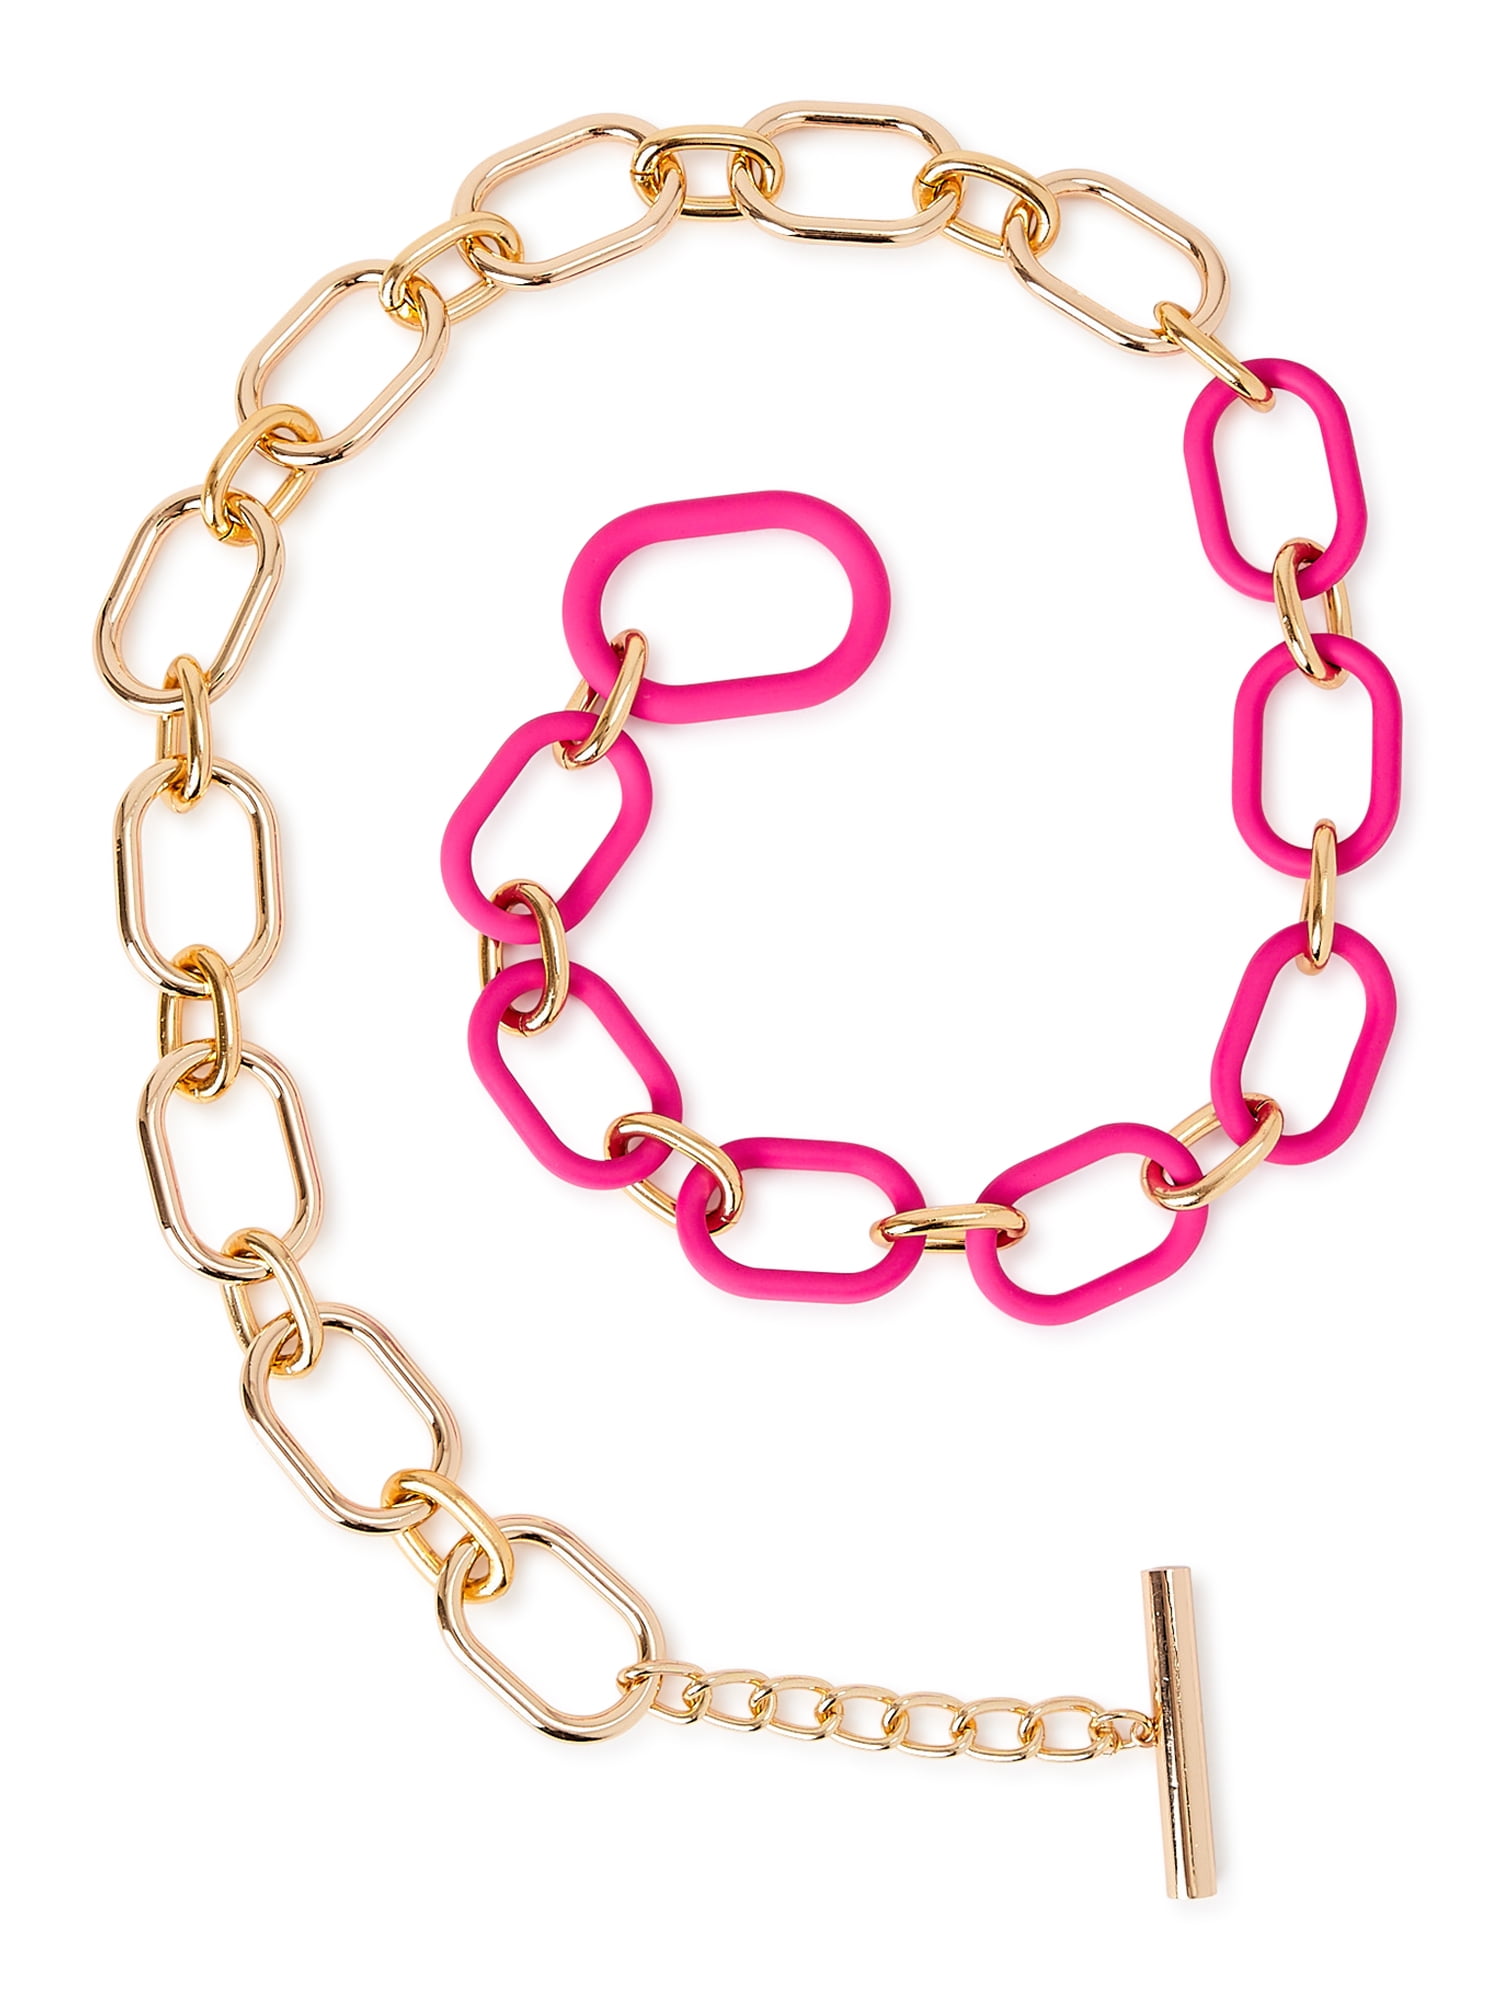 SALE Bright Pink and Double Row Chain Design Belt Woman Girls Fashion Accessory 